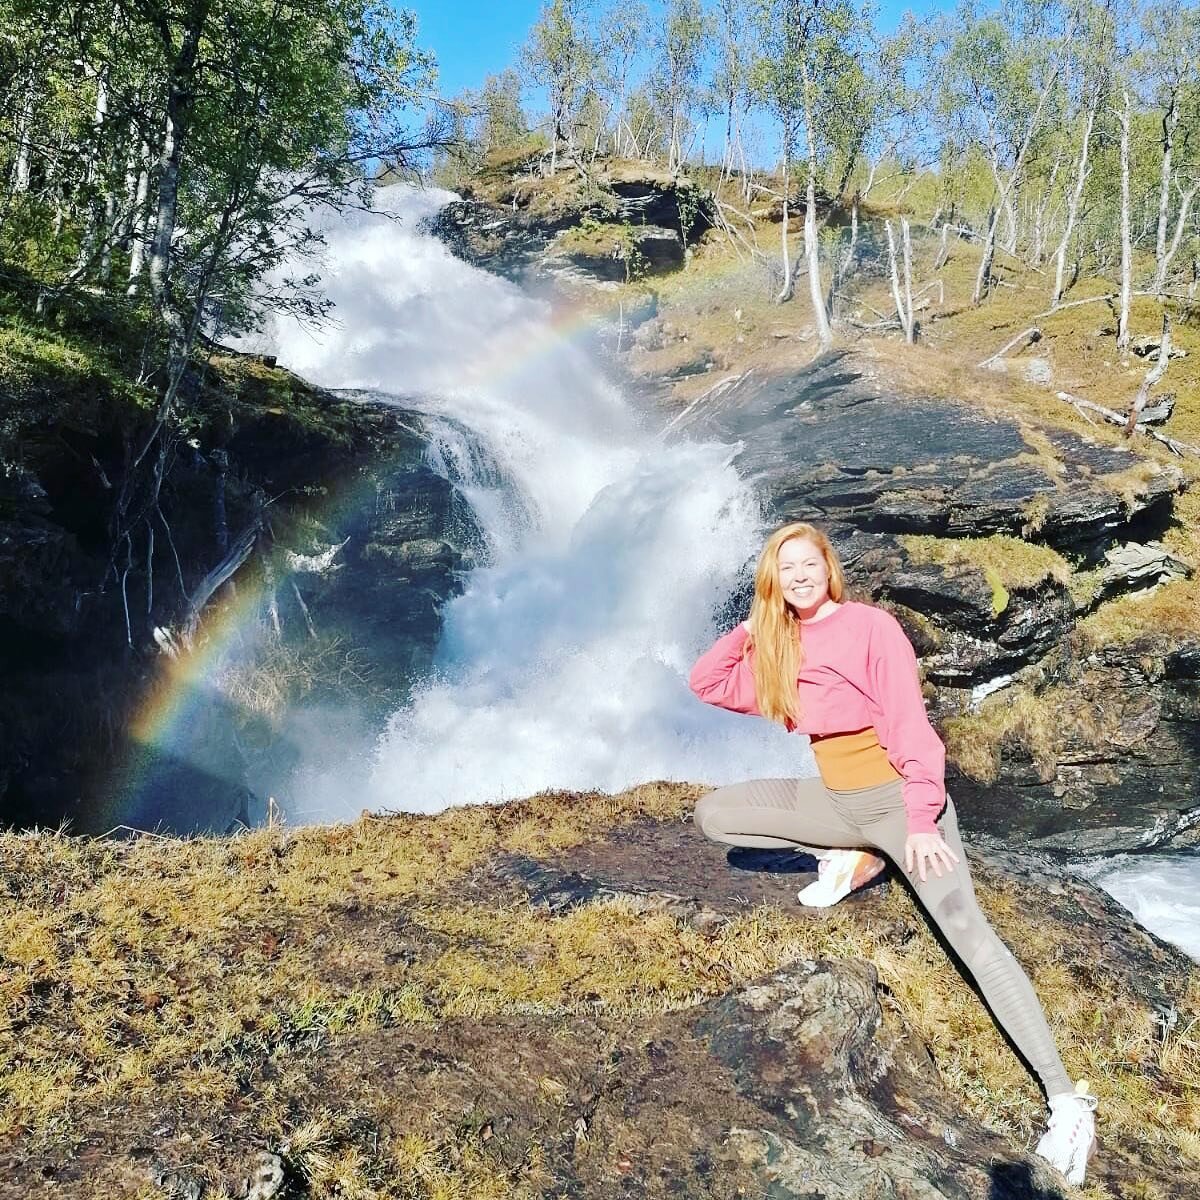 Happy Midsummer✨🌸💐💕 Such magical aboundance everywhere in nature! Let's soak it up and enjoy🌼🌈
.
#midsummer #rainbows #nature #aboundance #magic #summersolstice #norway #troms&oslash;